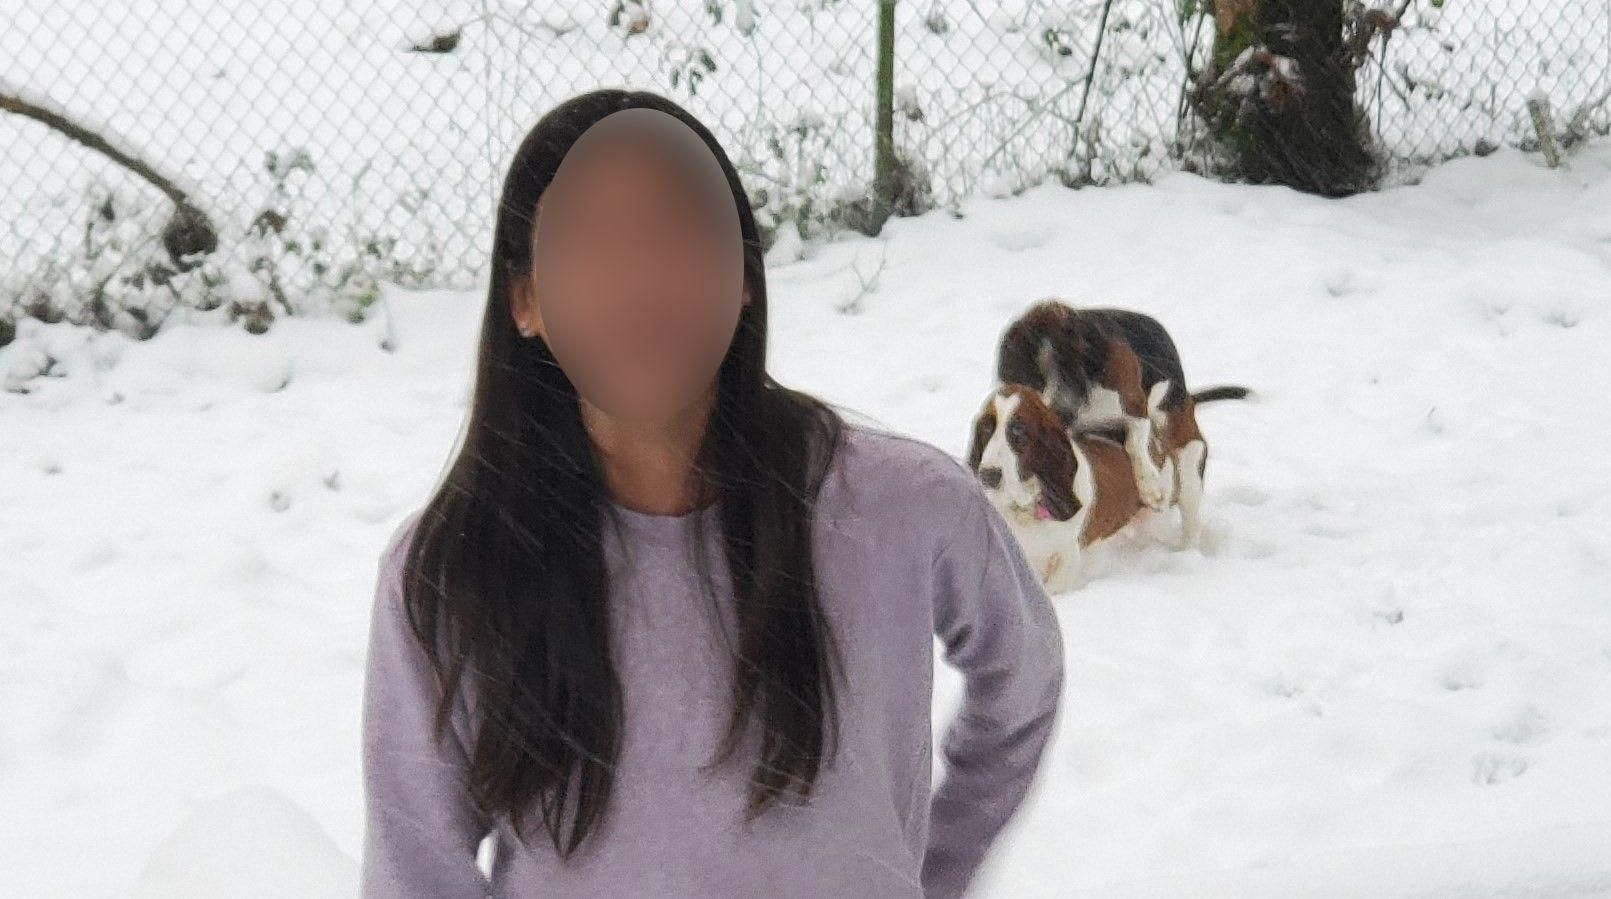 My daughter asked me to take a pic of her in the snow for her Instagram. Okay!